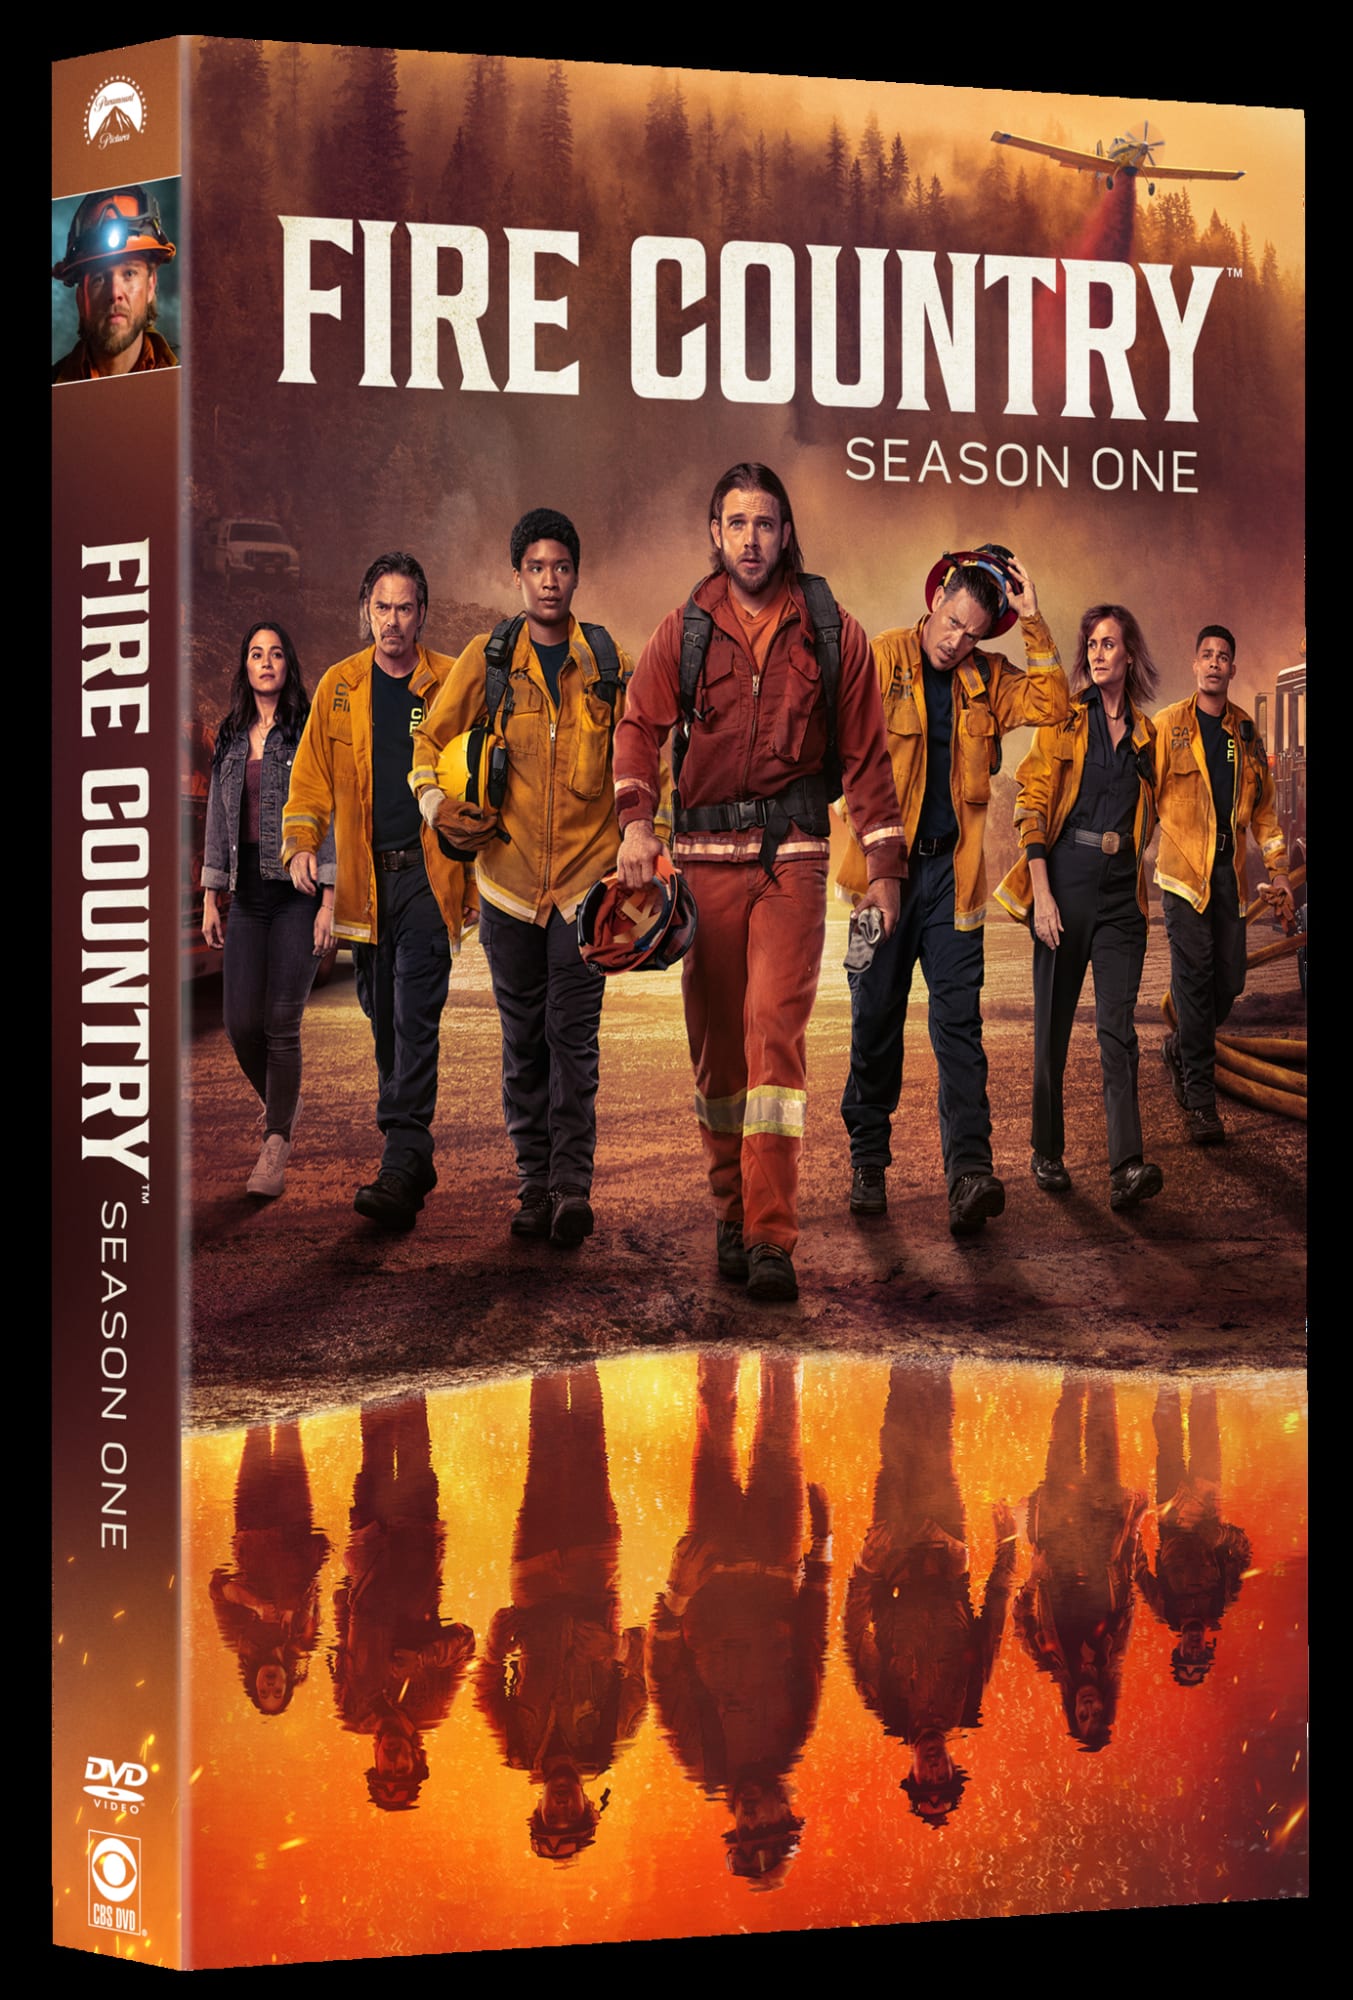 The Fire Country Season 1 DVD release date has been confirmed for September 2023